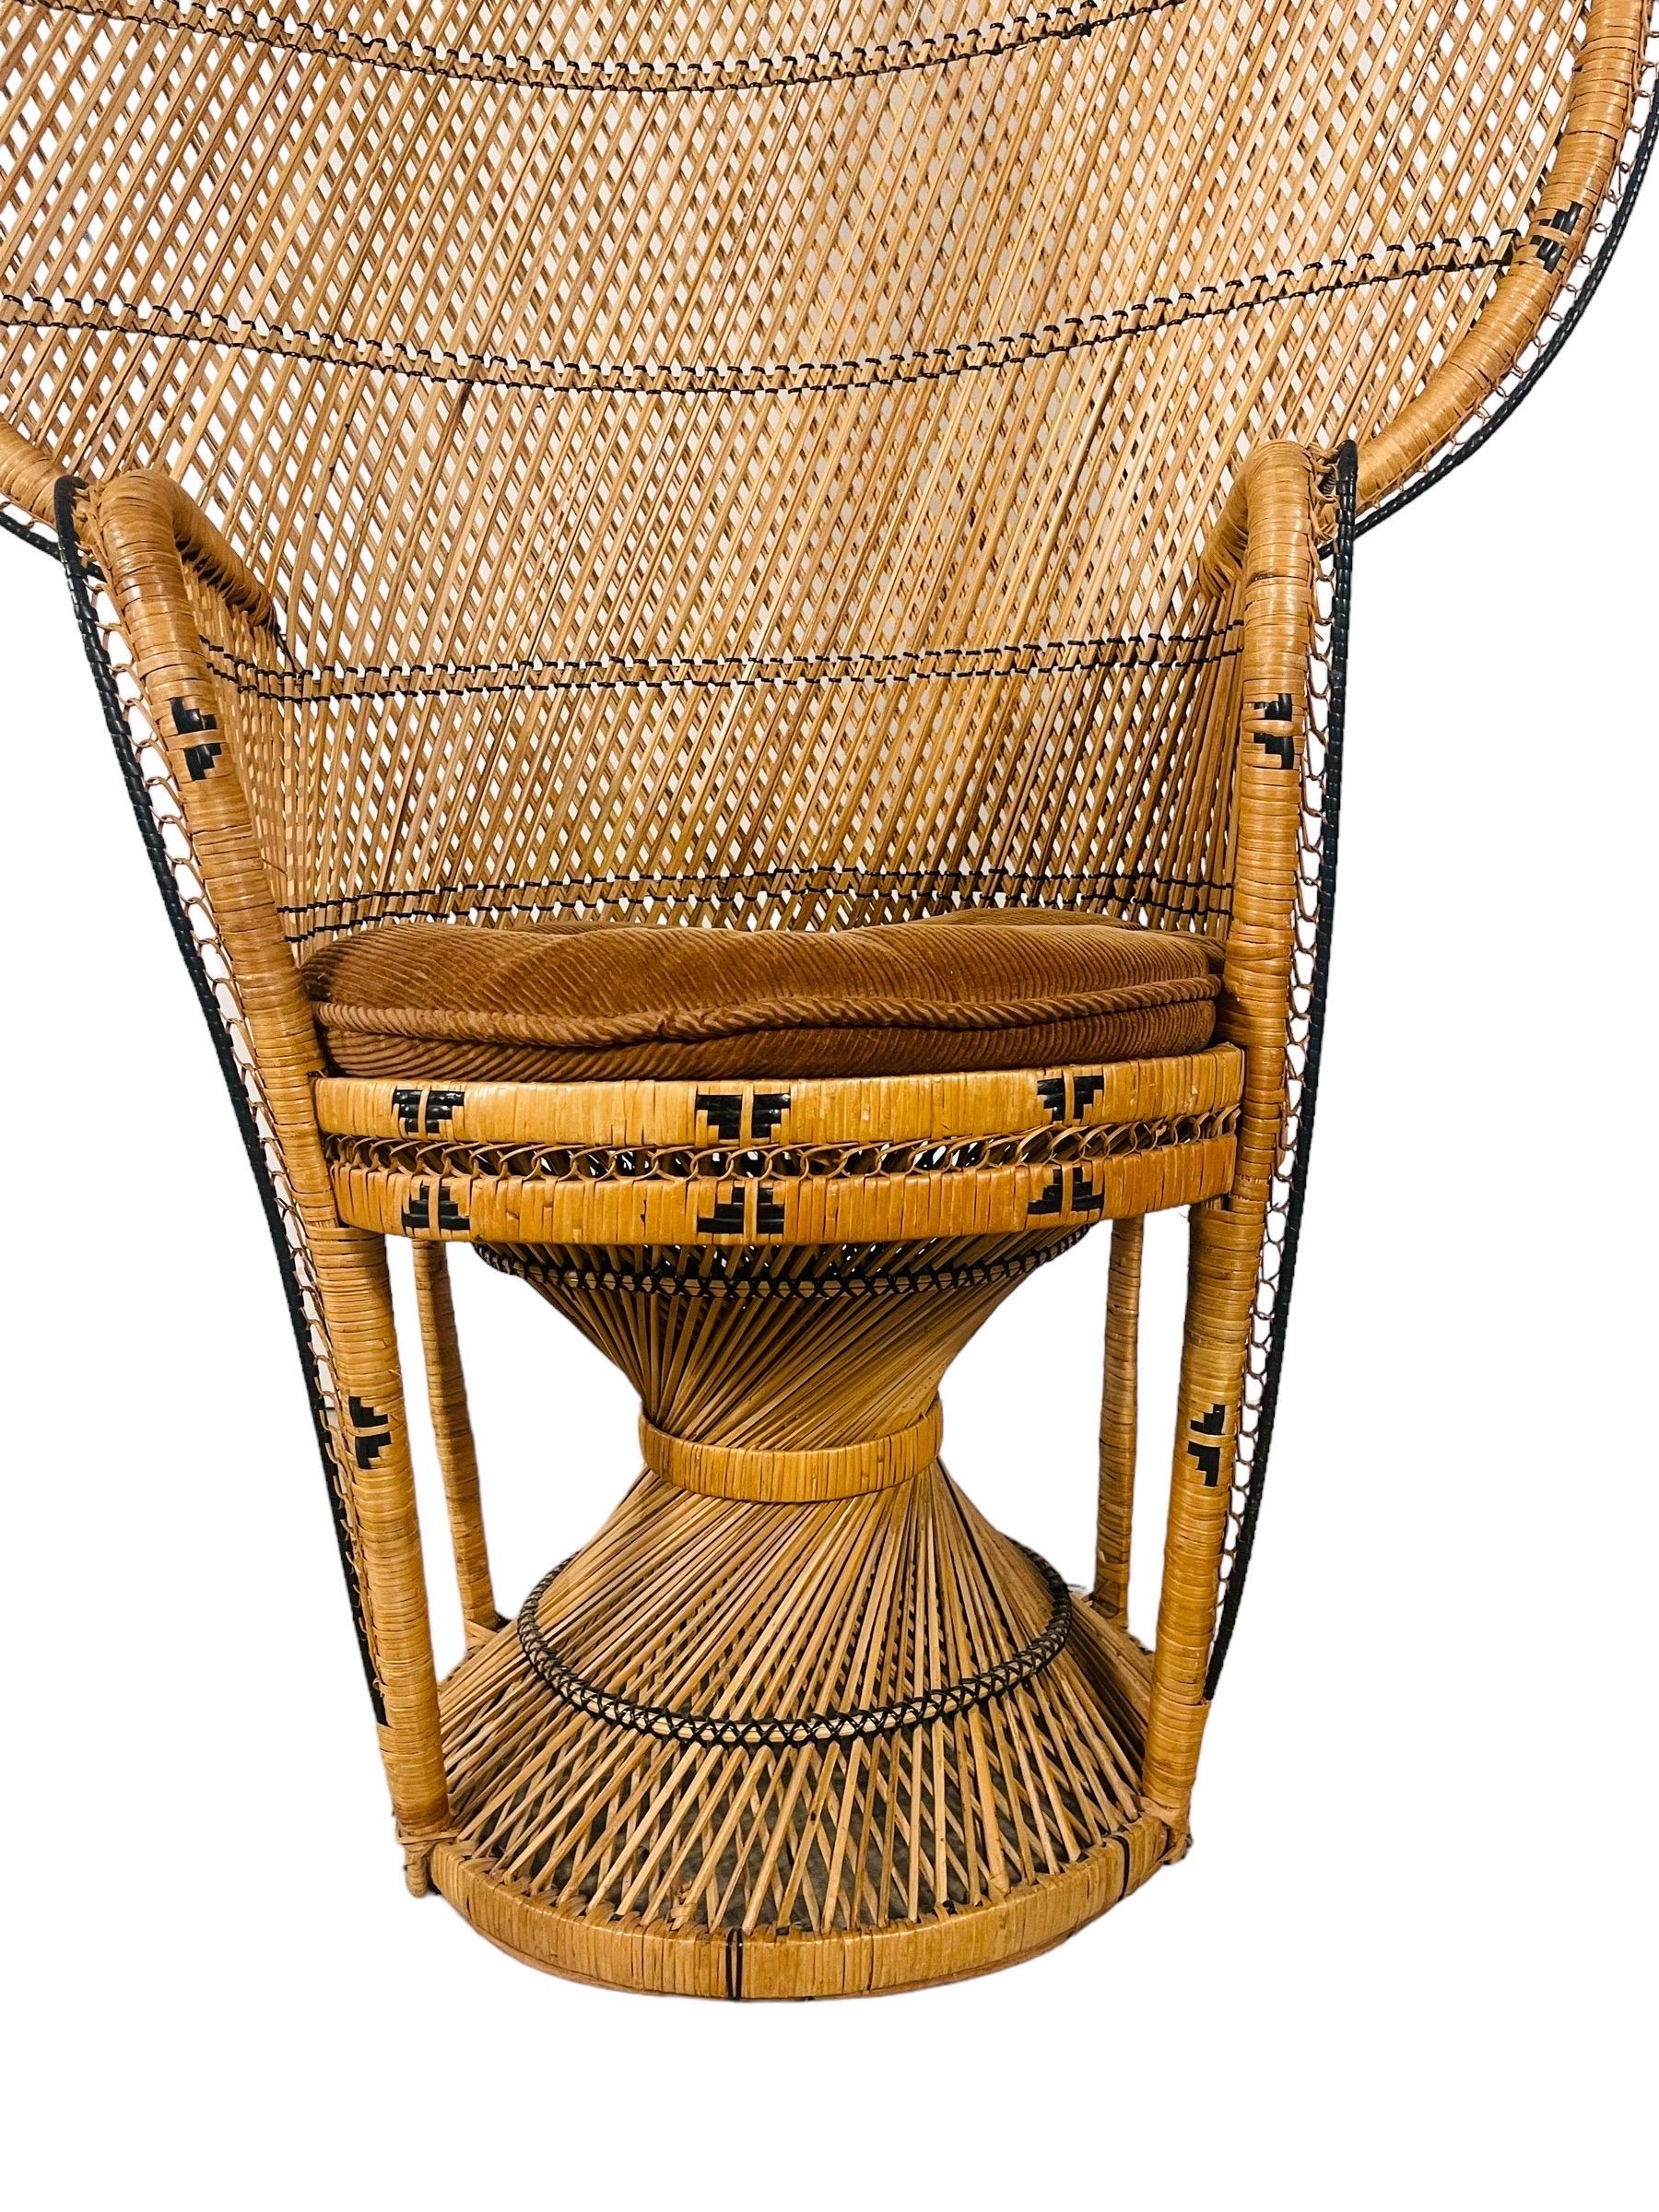 Vintage Boho Chic Wicker, Rattan Peacock Chair In Good Condition For Sale In Brooklyn, NY